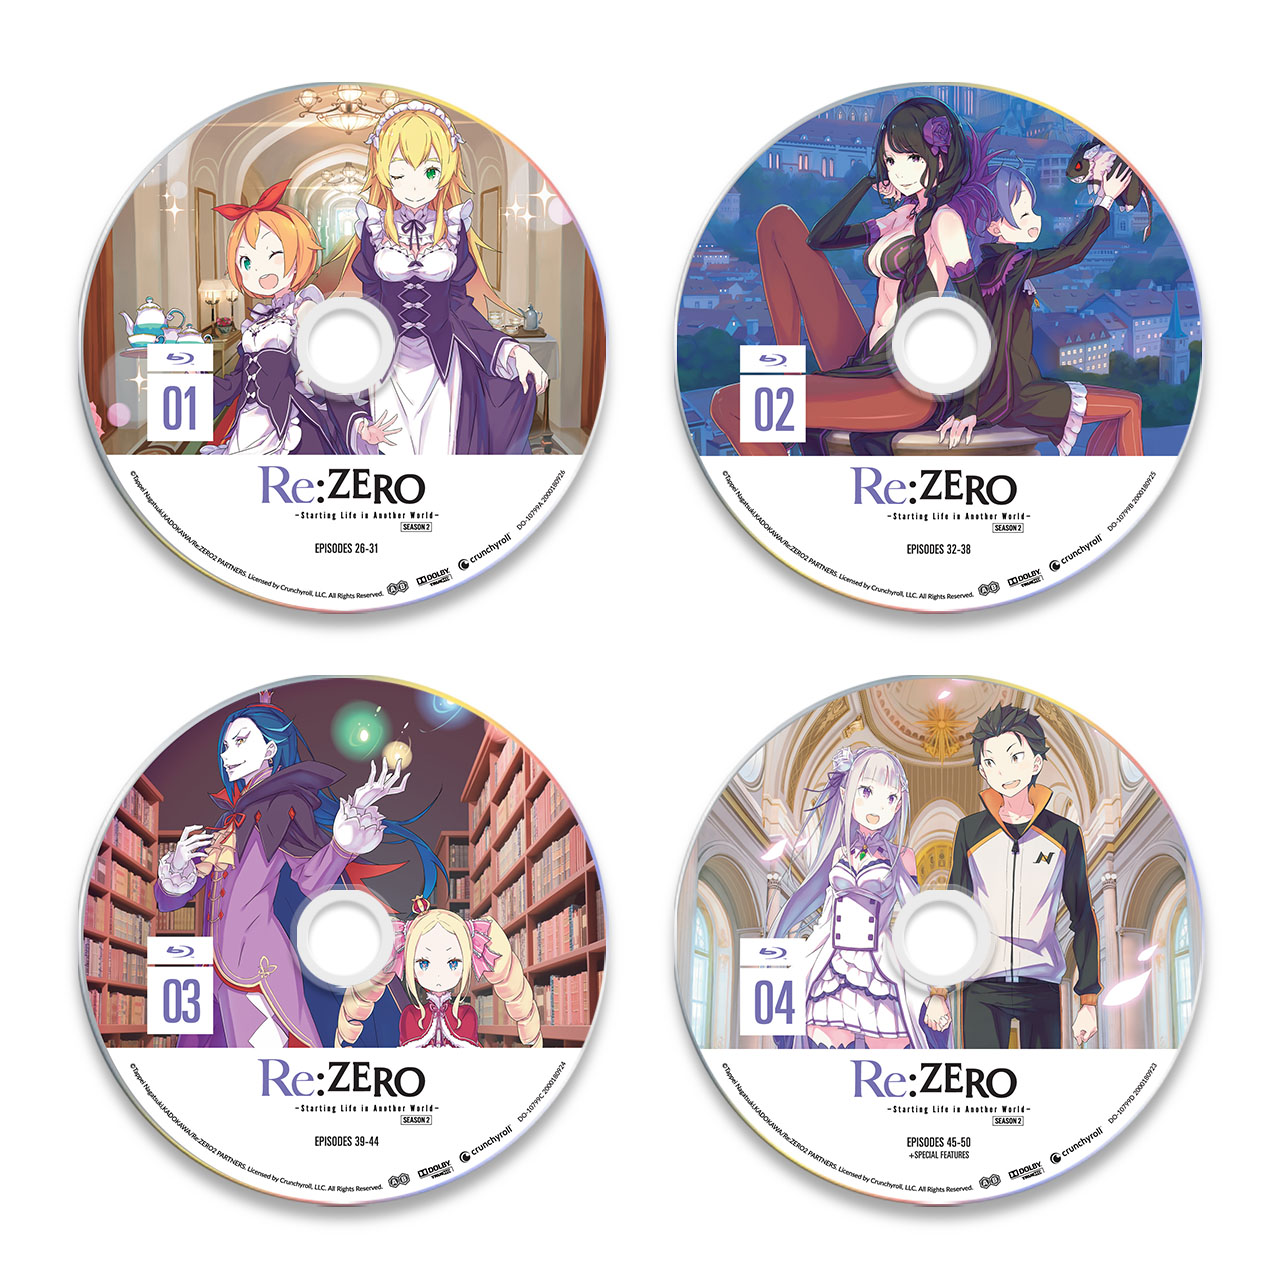 Re:ZERO -Starting Life in Another World- Season 2 - Blu-ray - Limited Edition image count 4